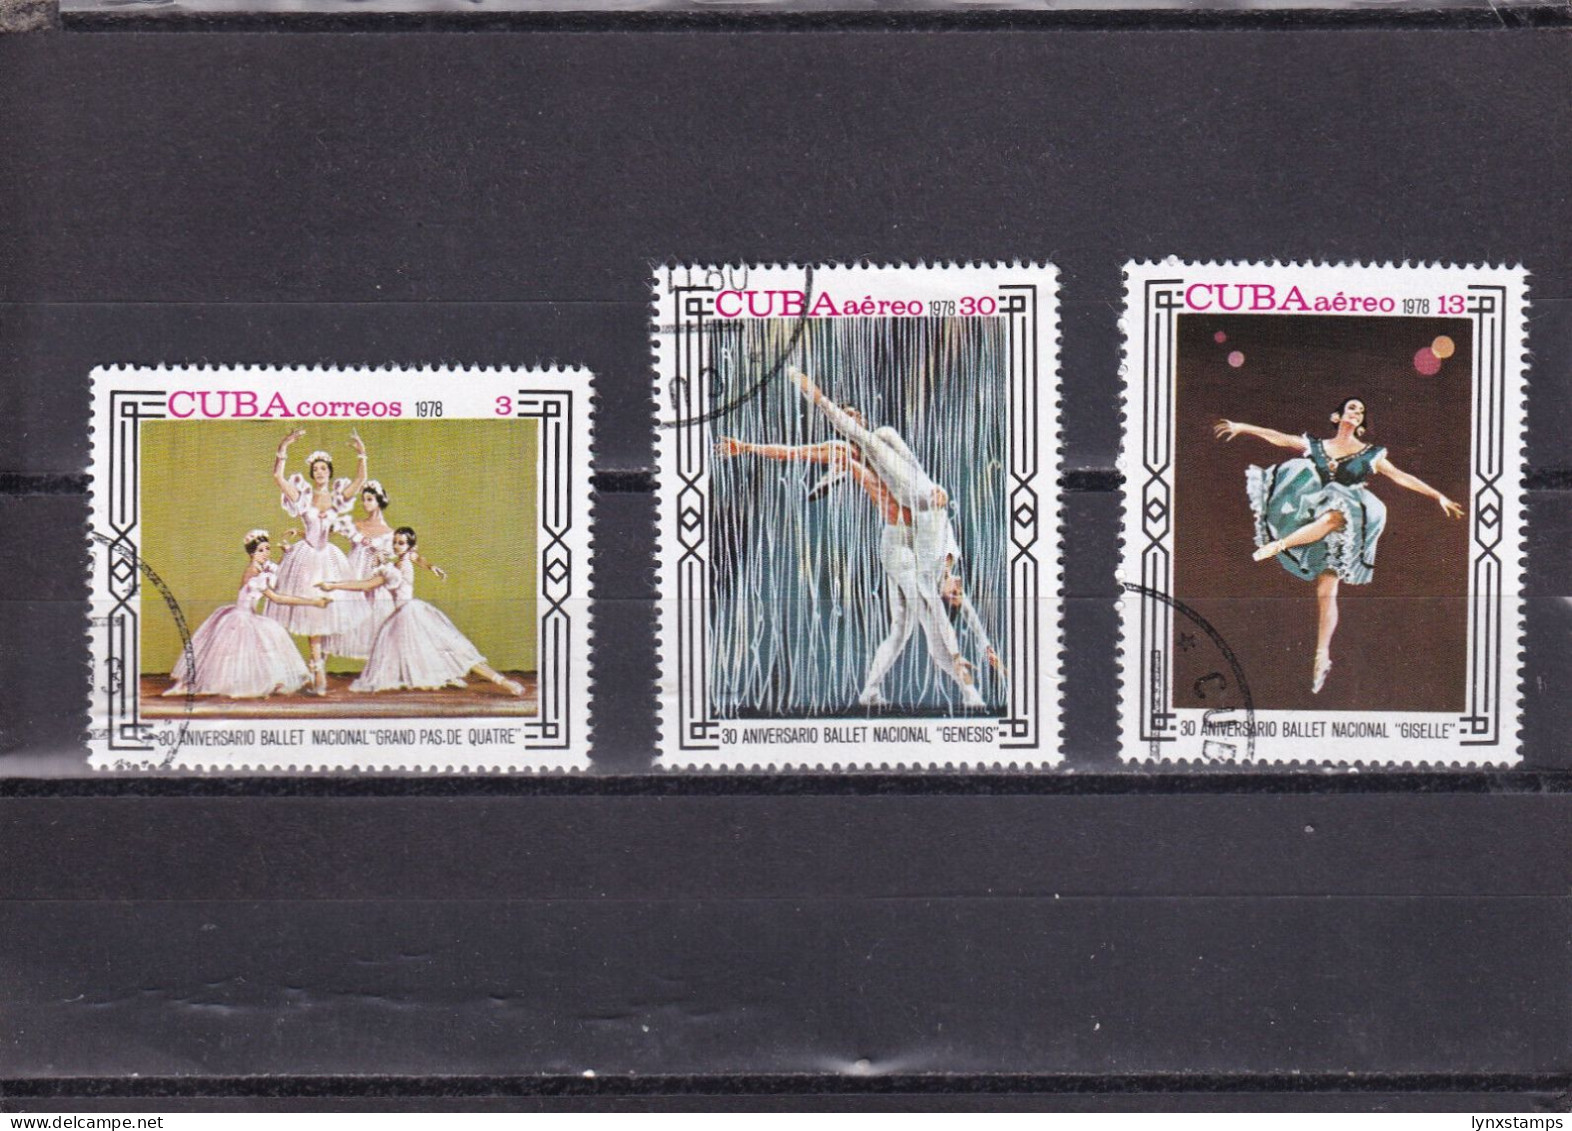 LI03 SCuba 1978 The 30th Anniversary Of The National Ballet Company Used Stamps - Gebraucht